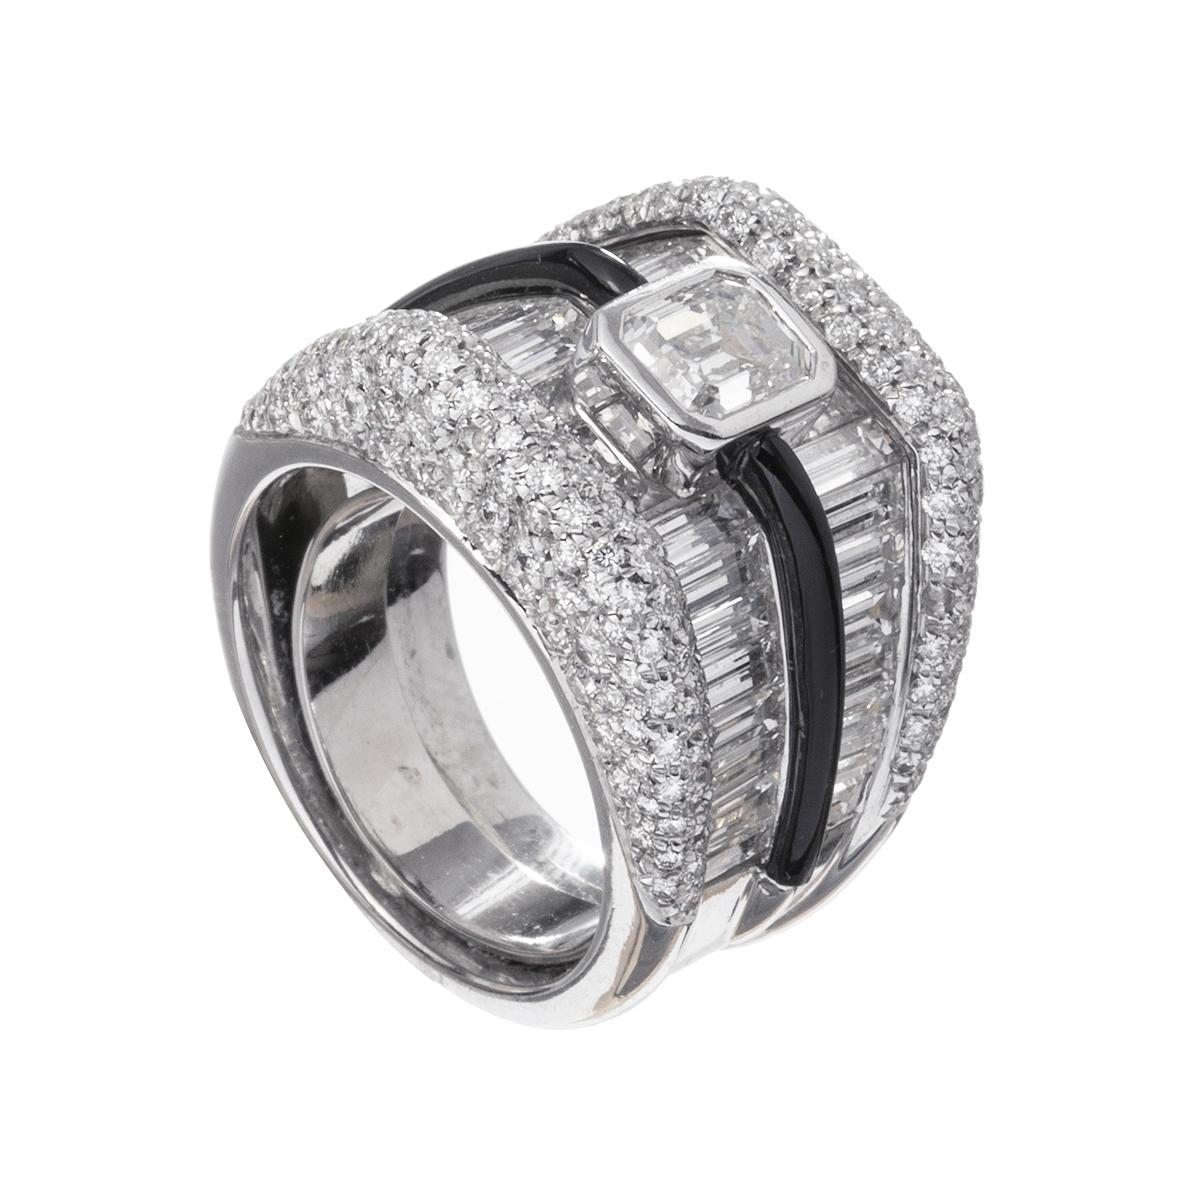 Wide band ring designed by Ambrosi.  Centering a larger bezel-set emerald-cut diamond flanked by a double row of channel-set baguette-cut diamonds separated by black enamel with edges pavé-set with round brilliant-cut diamonds. Handmade in platinum.